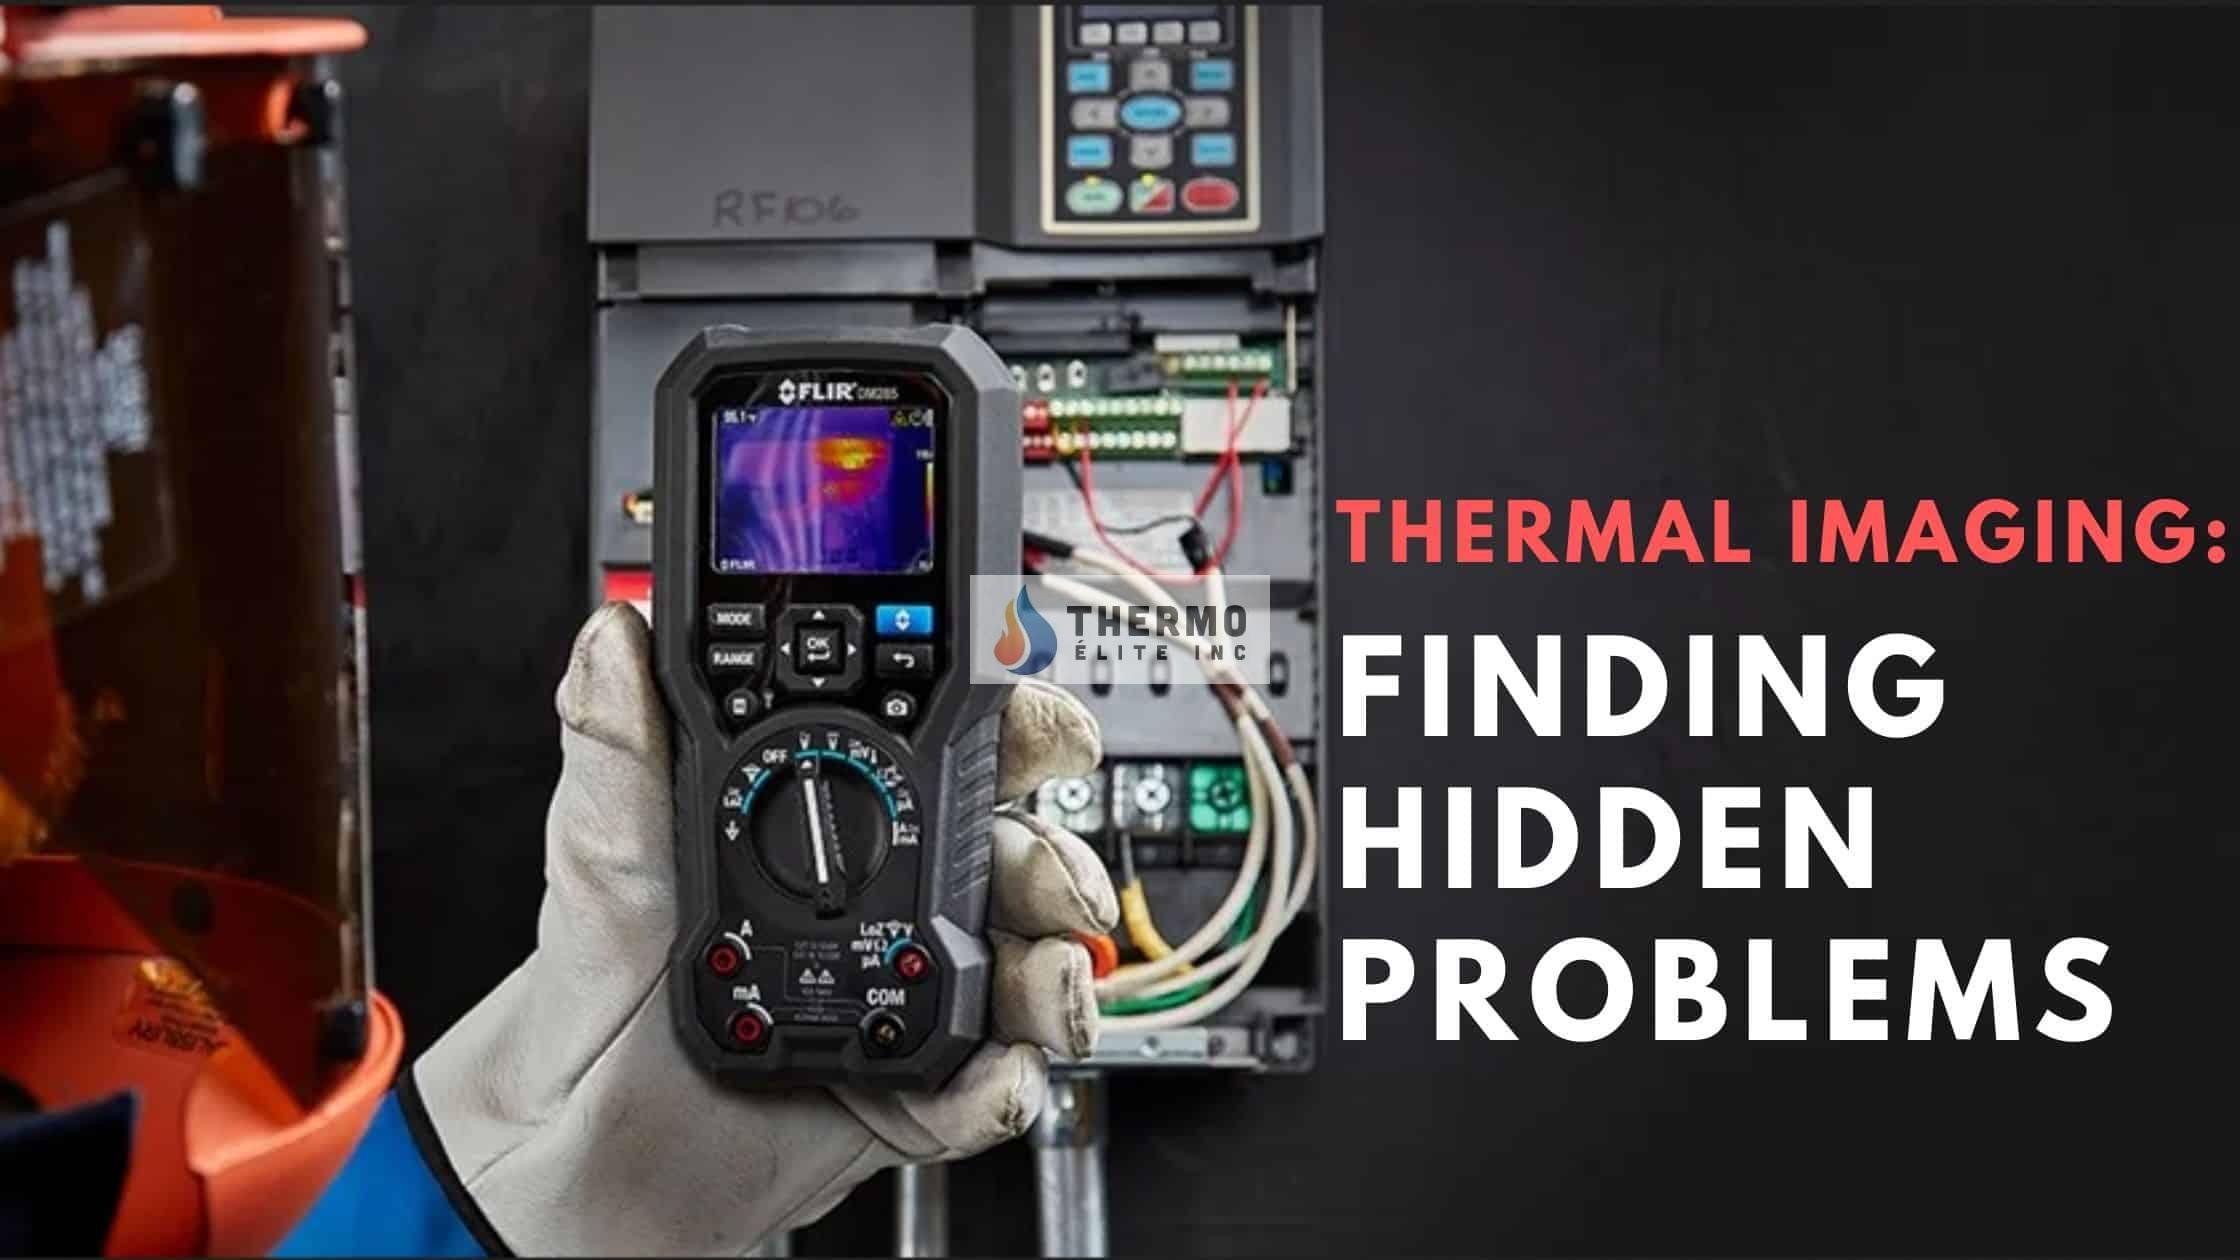 Thermal Imaging: Finding Hidden Problems